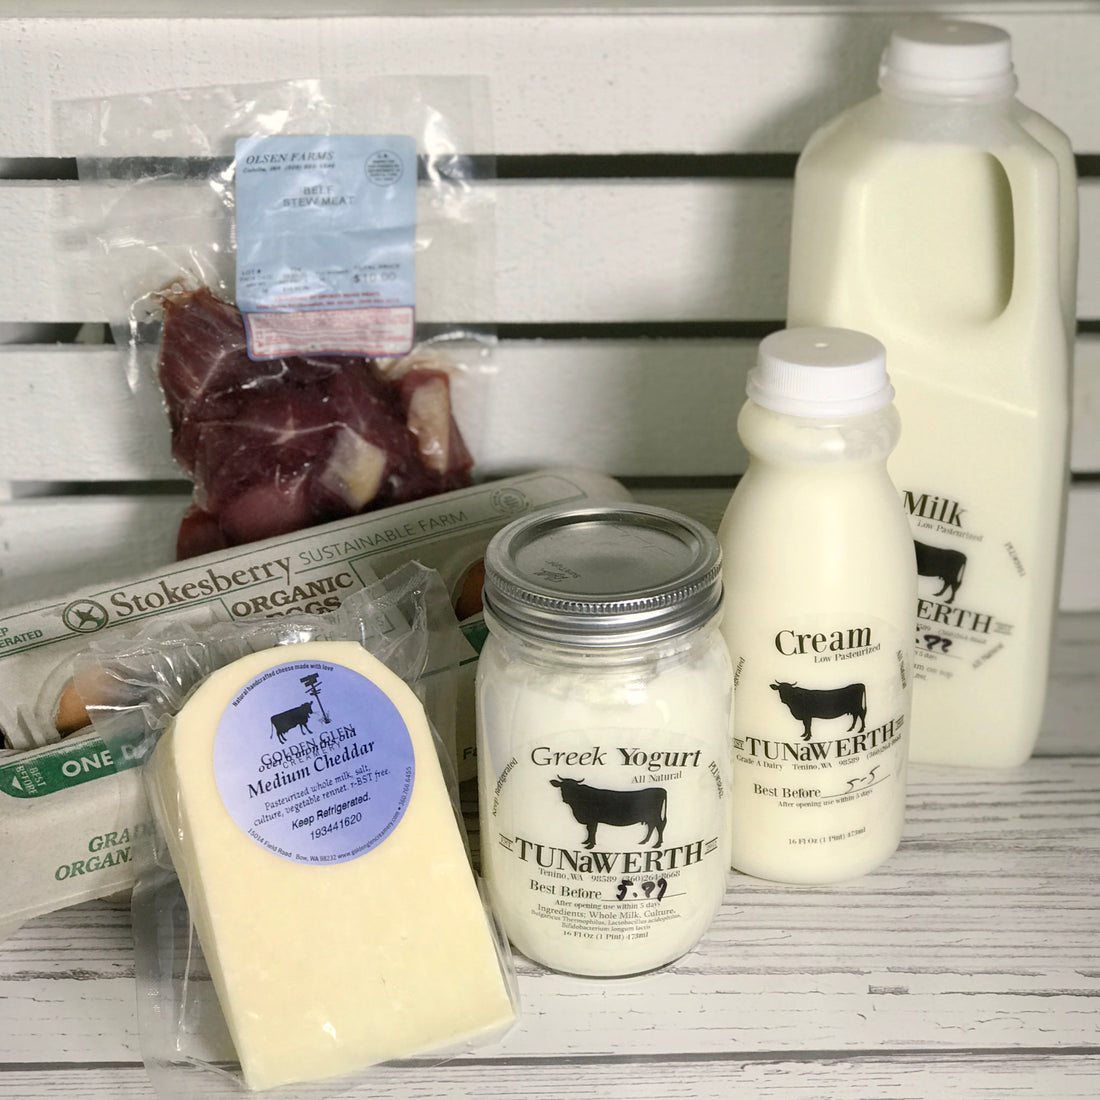 Dairy/Butcher Subscription